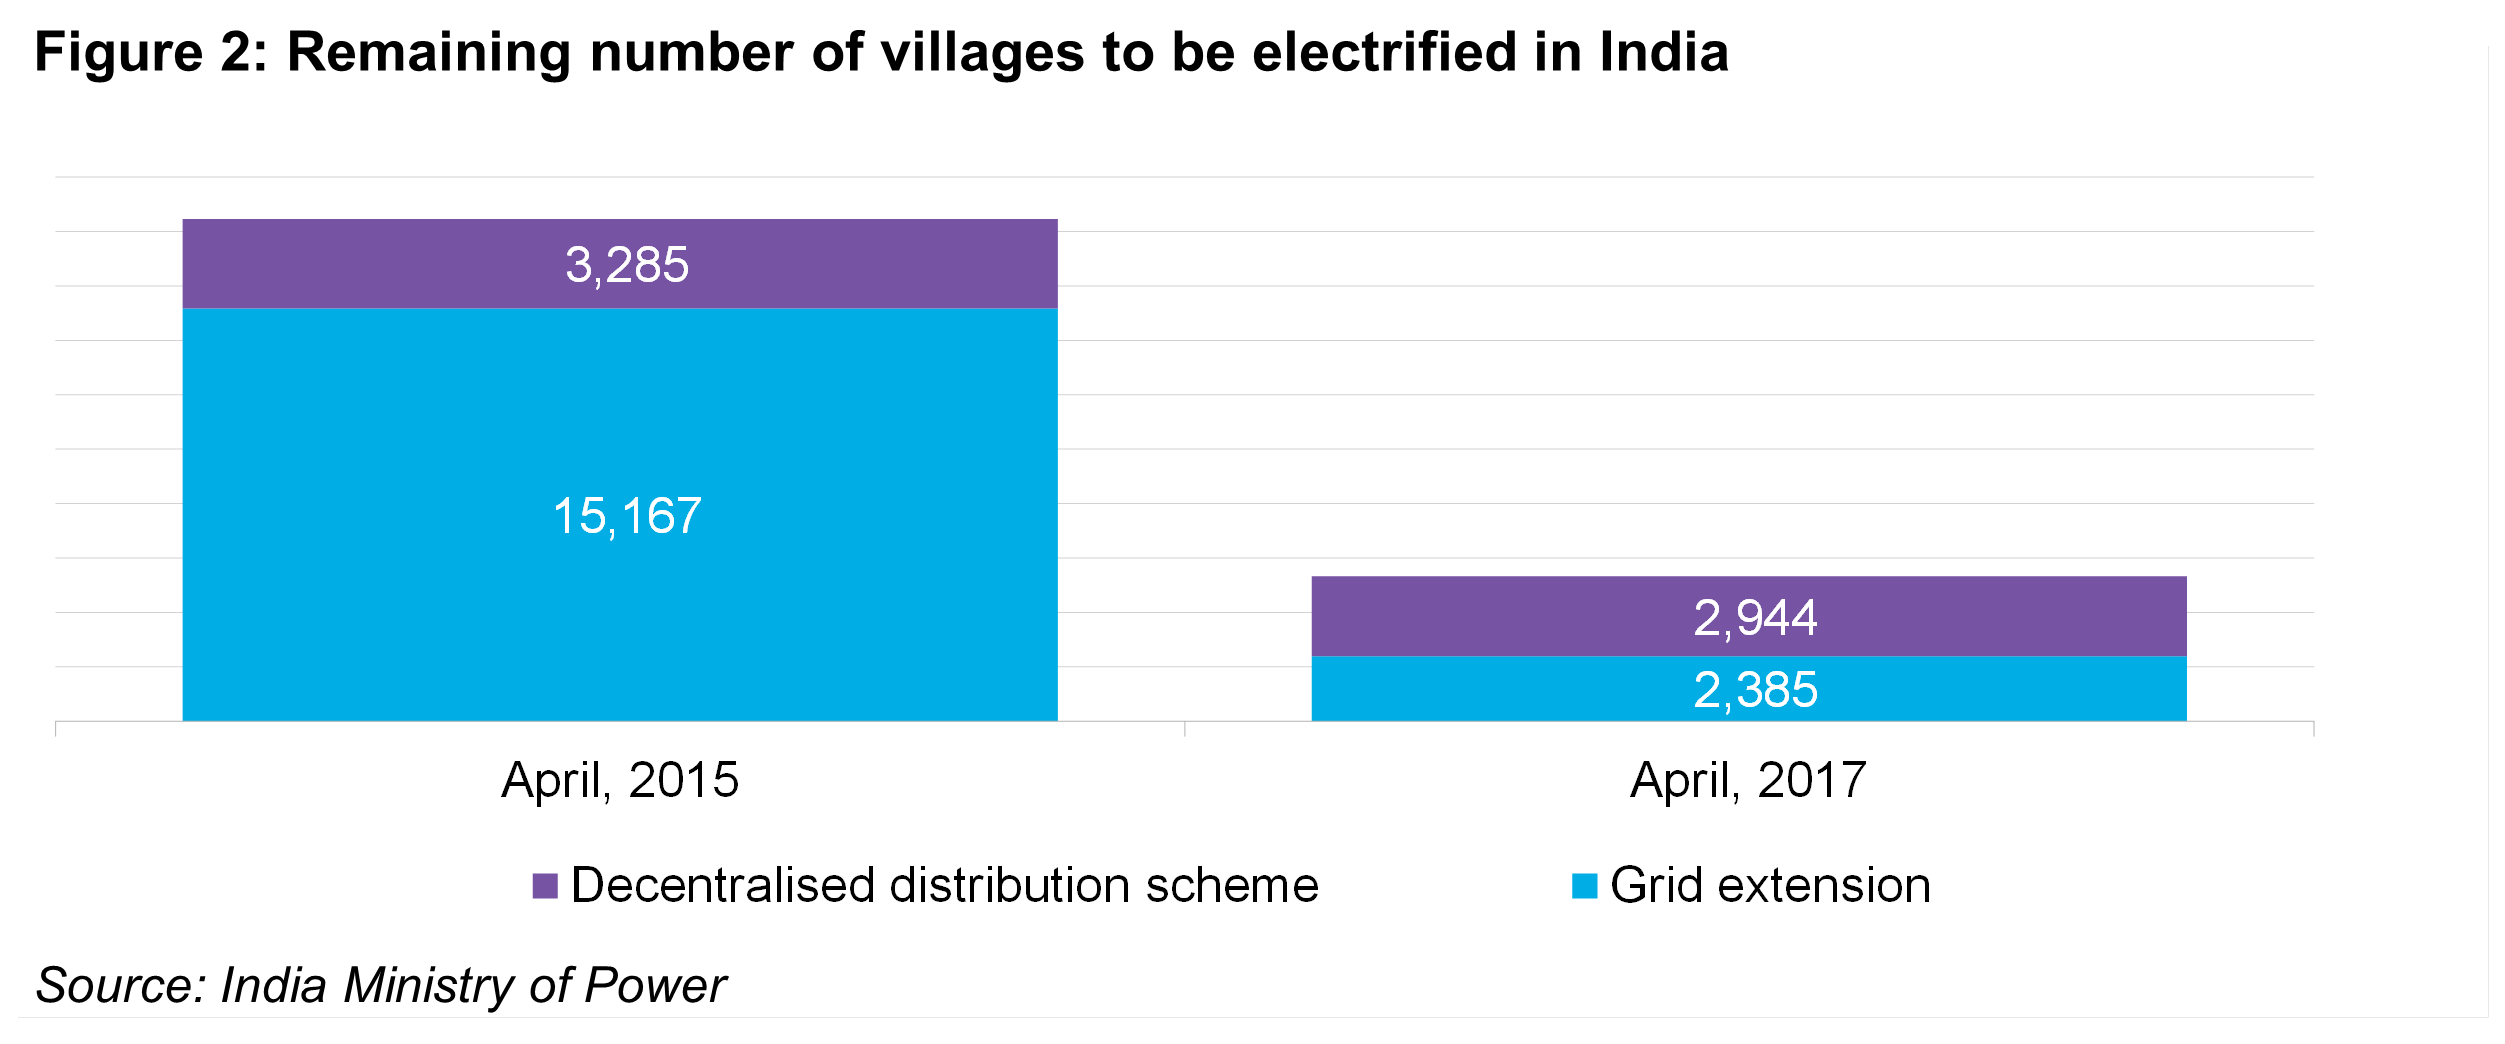 OG - Fig 2 - Remaining number of villages to be electrified in India